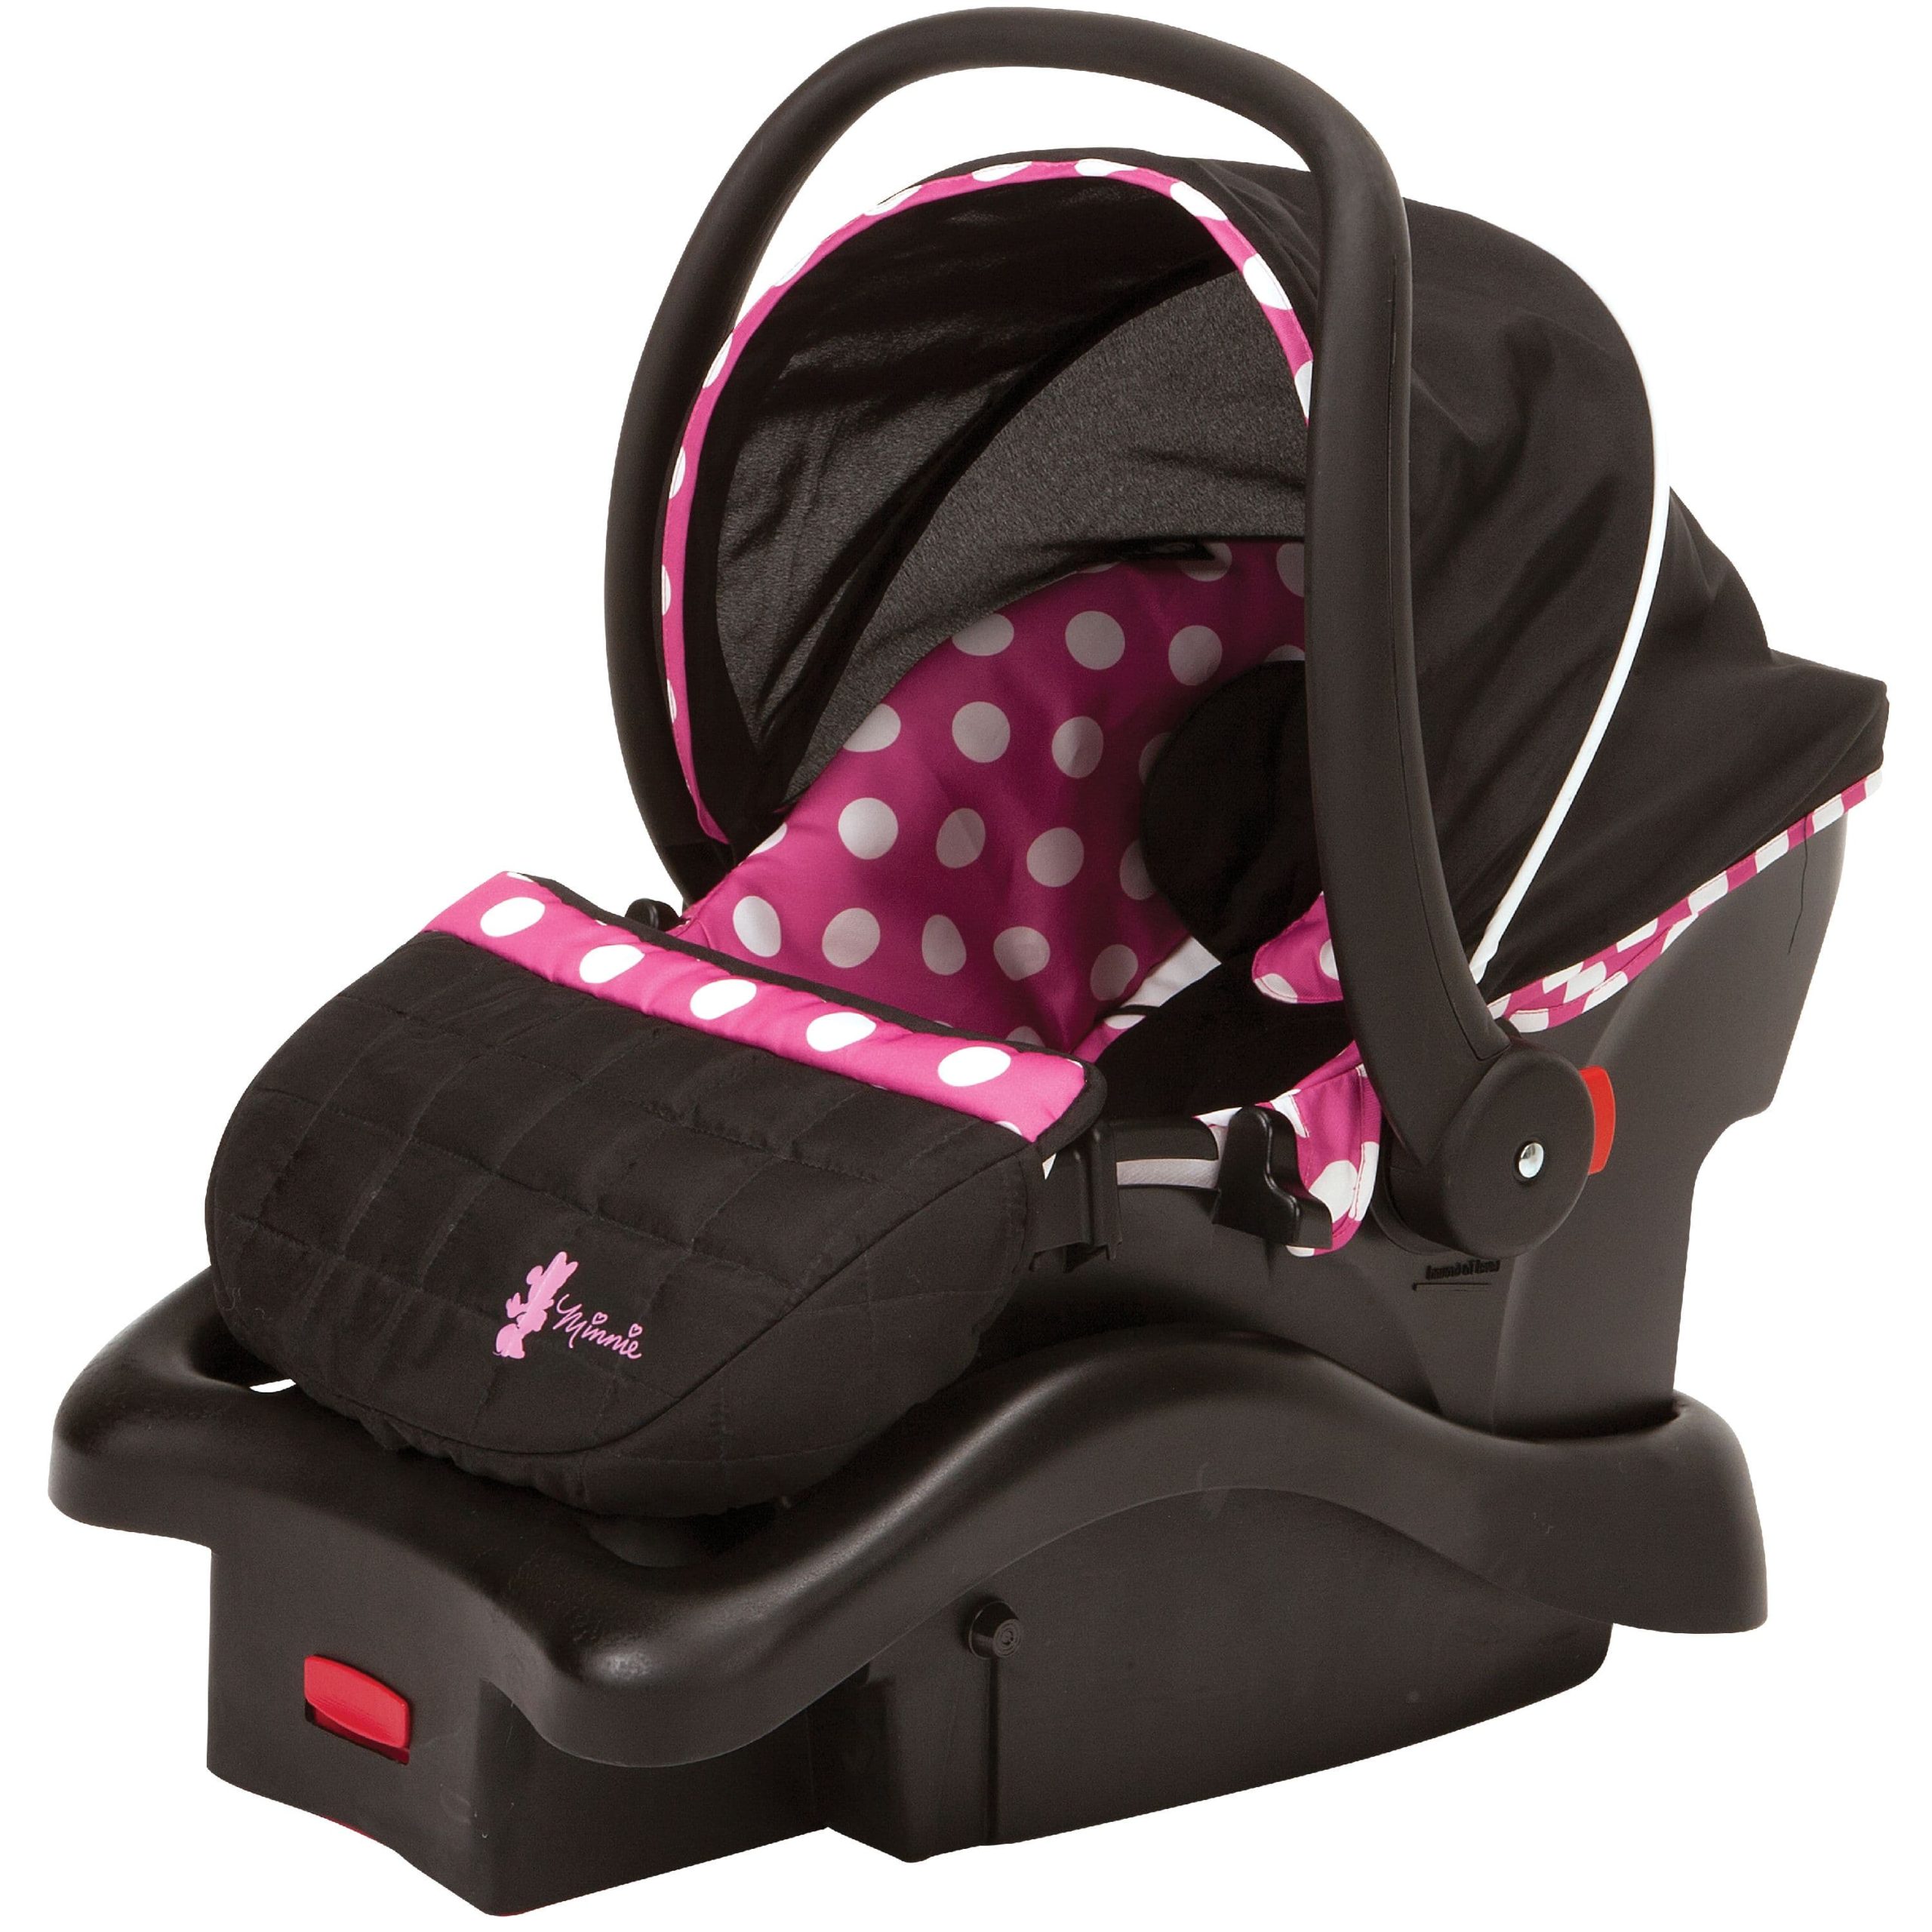 Disney Baby Light'n Comfy 22 Luxe minnie mouse car seat for baby infant